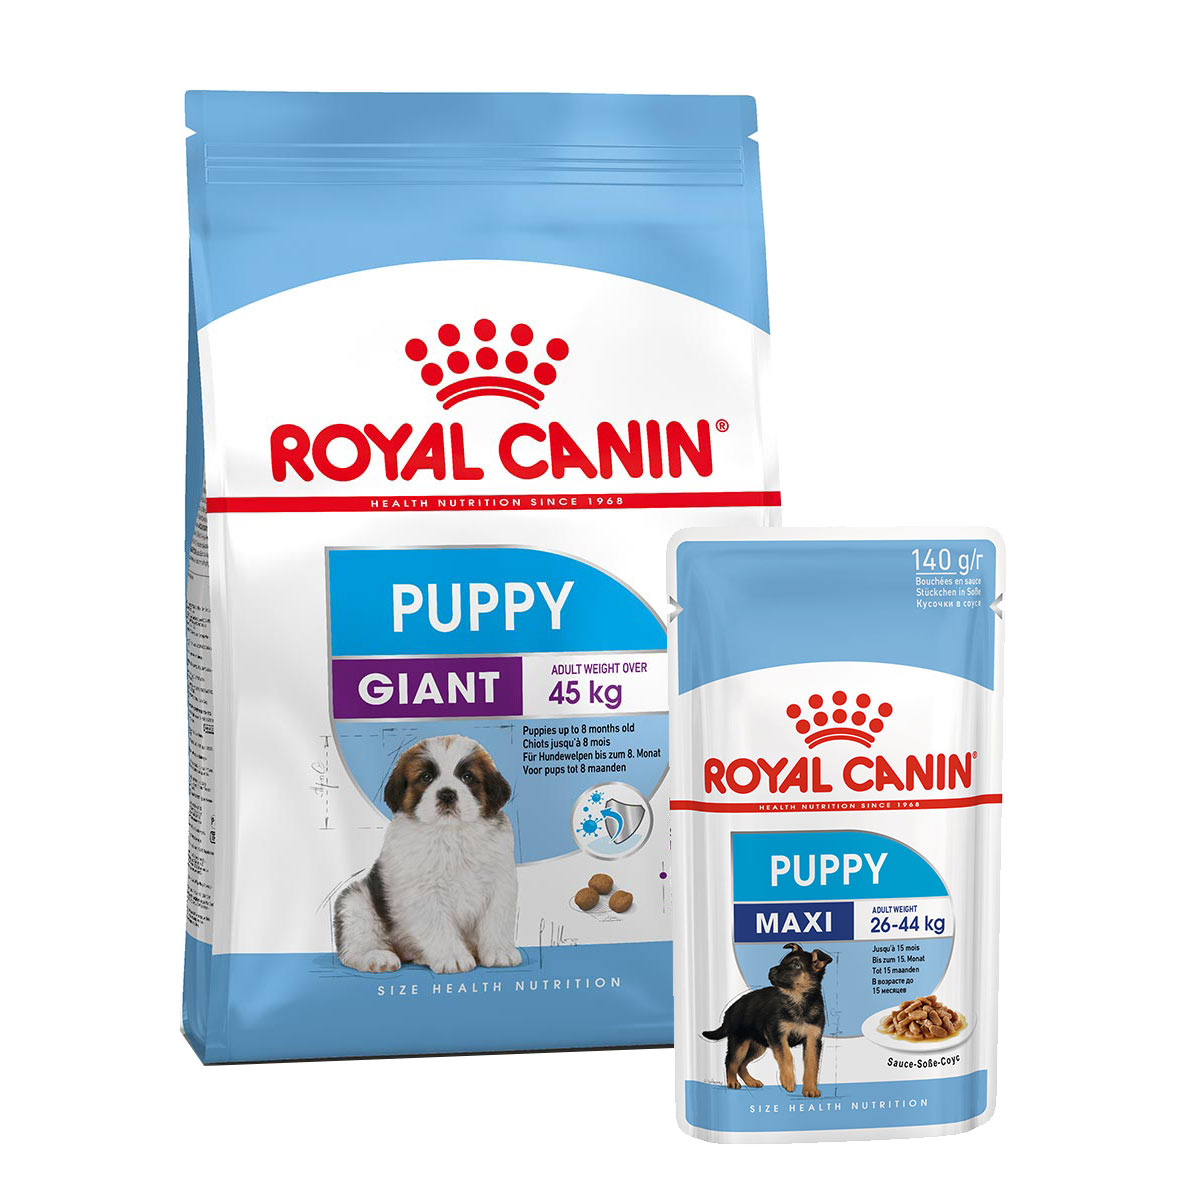 ROYAL CANIN Giant Puppy 3,5kg + Maxi Puppy in Soße 10x140g von Royal Canin